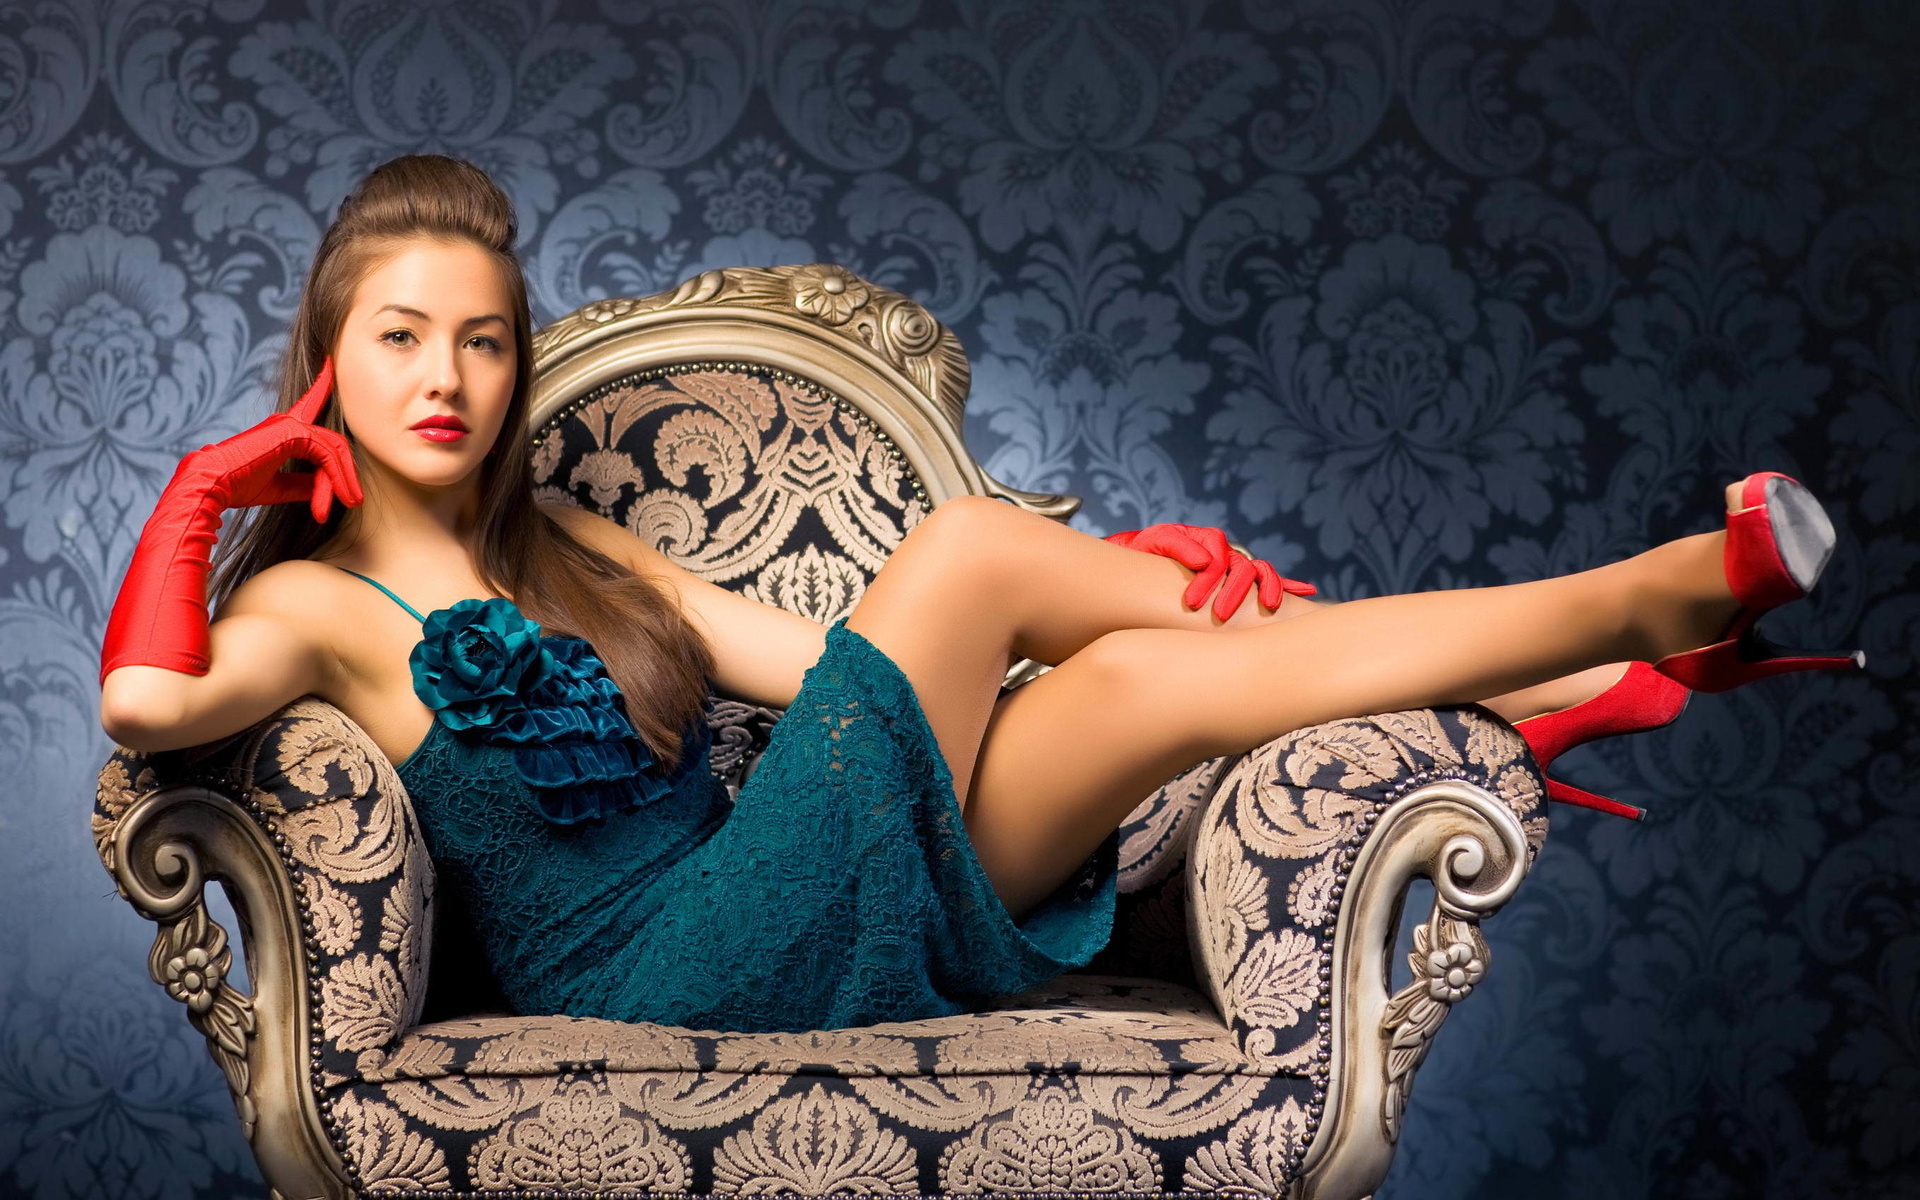 pose, look, face, hair, makeup, girl, red gloves, chair, heels, dress, red shoes, 